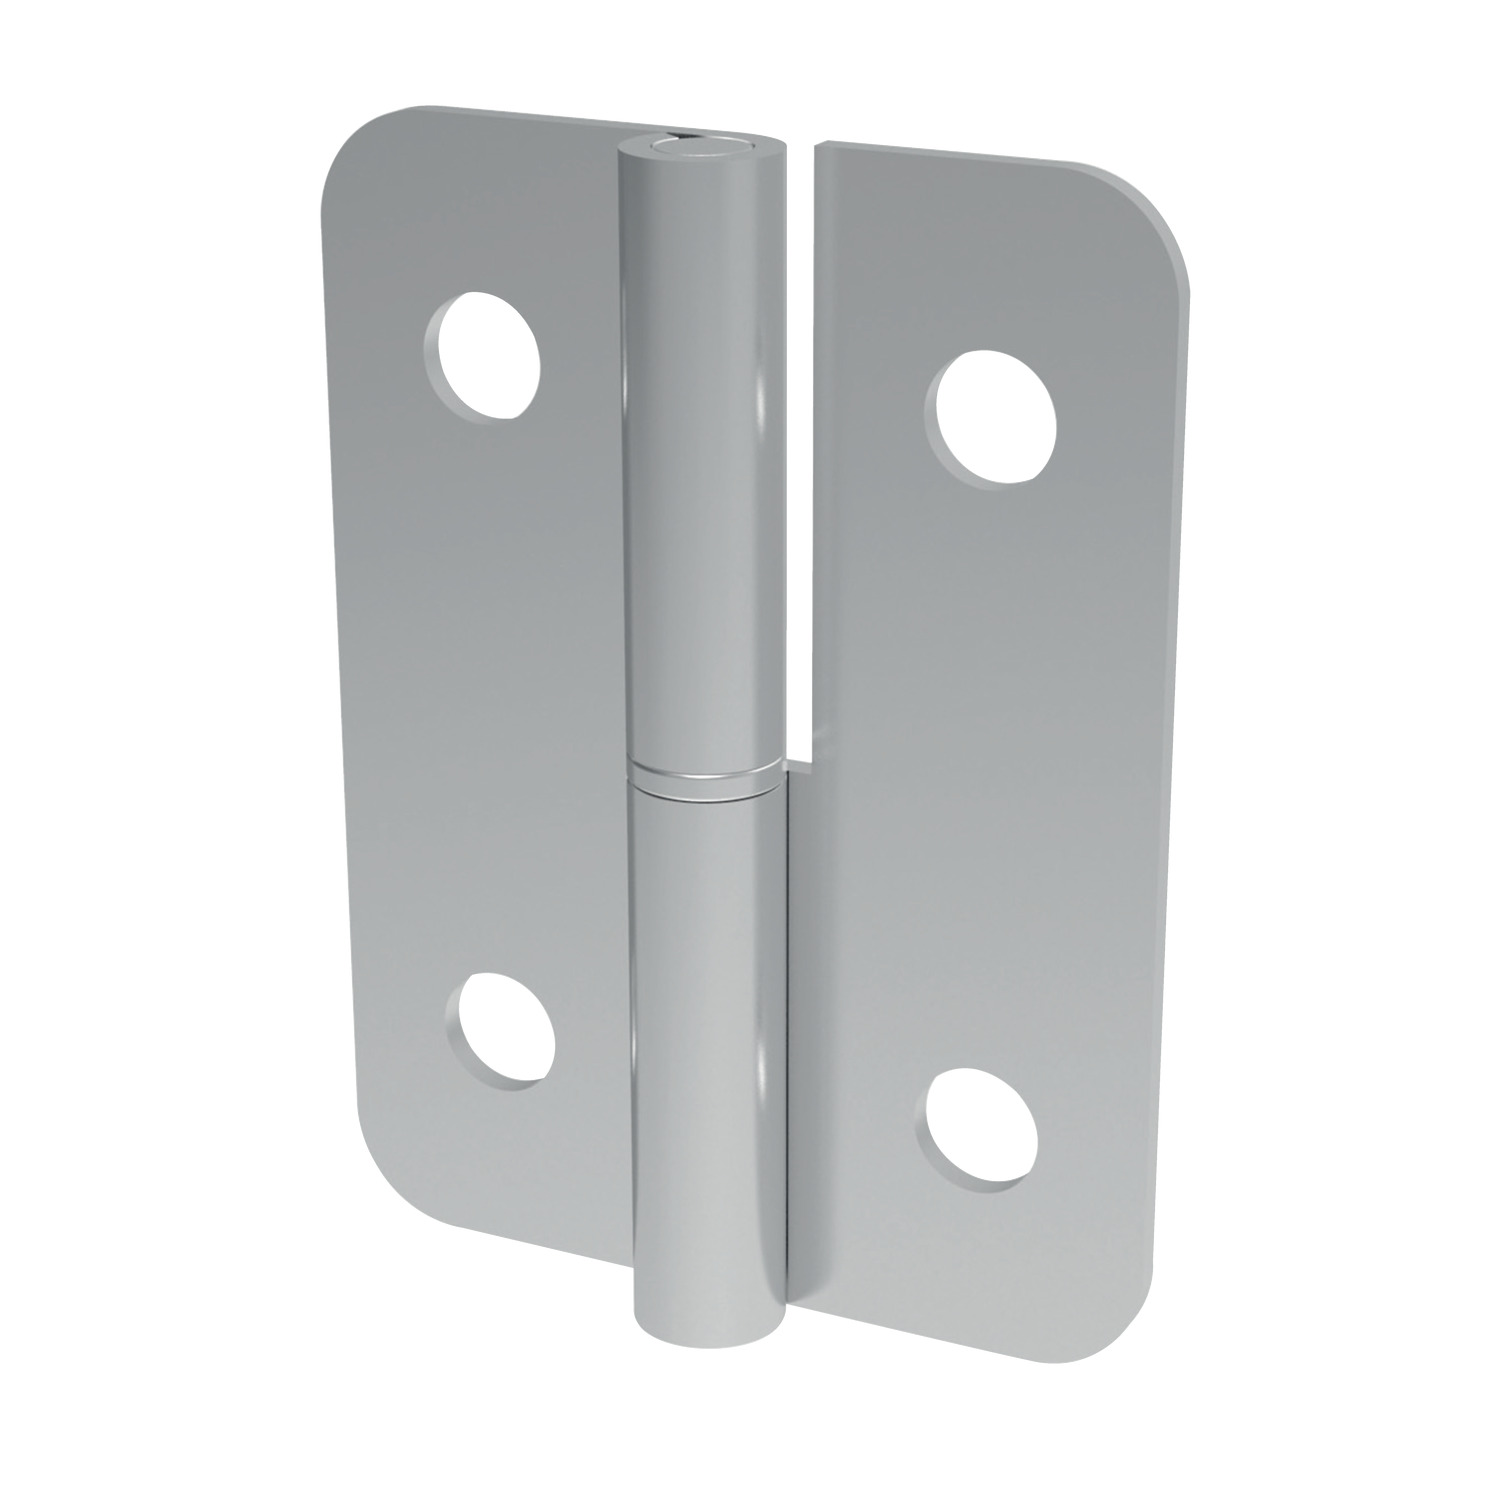 S2314.AW0010 Lift-Off Hinges off set - screw mount - s/s